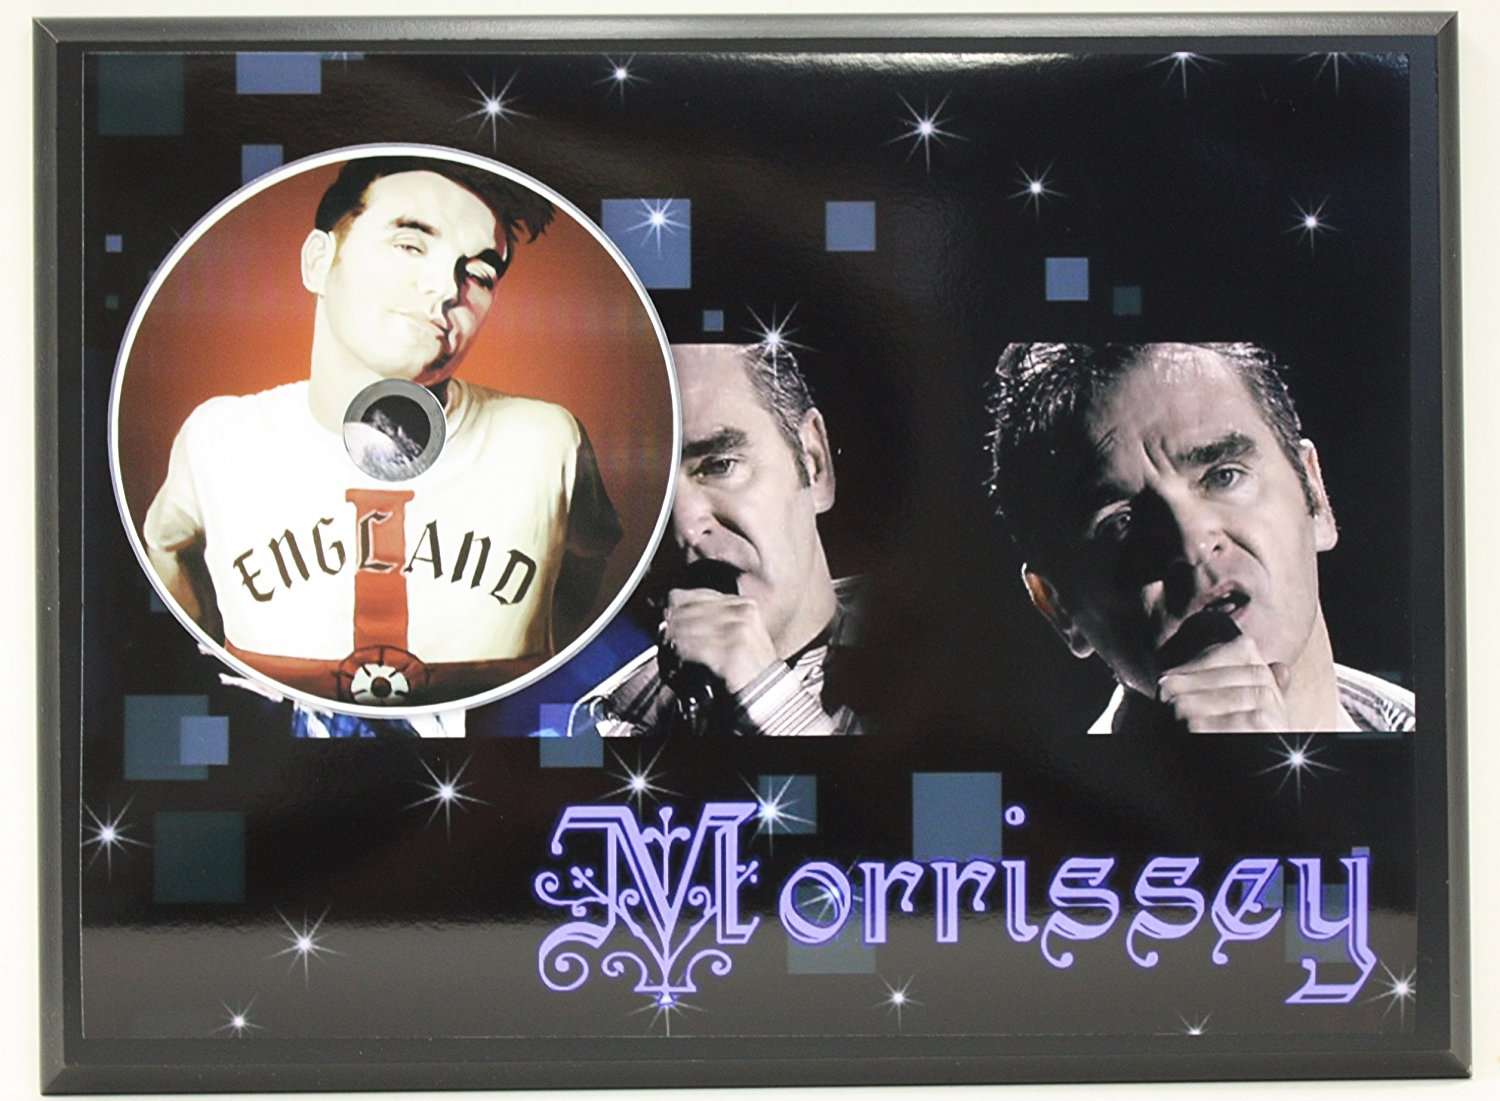 Morrissey Limited Edition Picture CD Disc Collectible Rare Gift